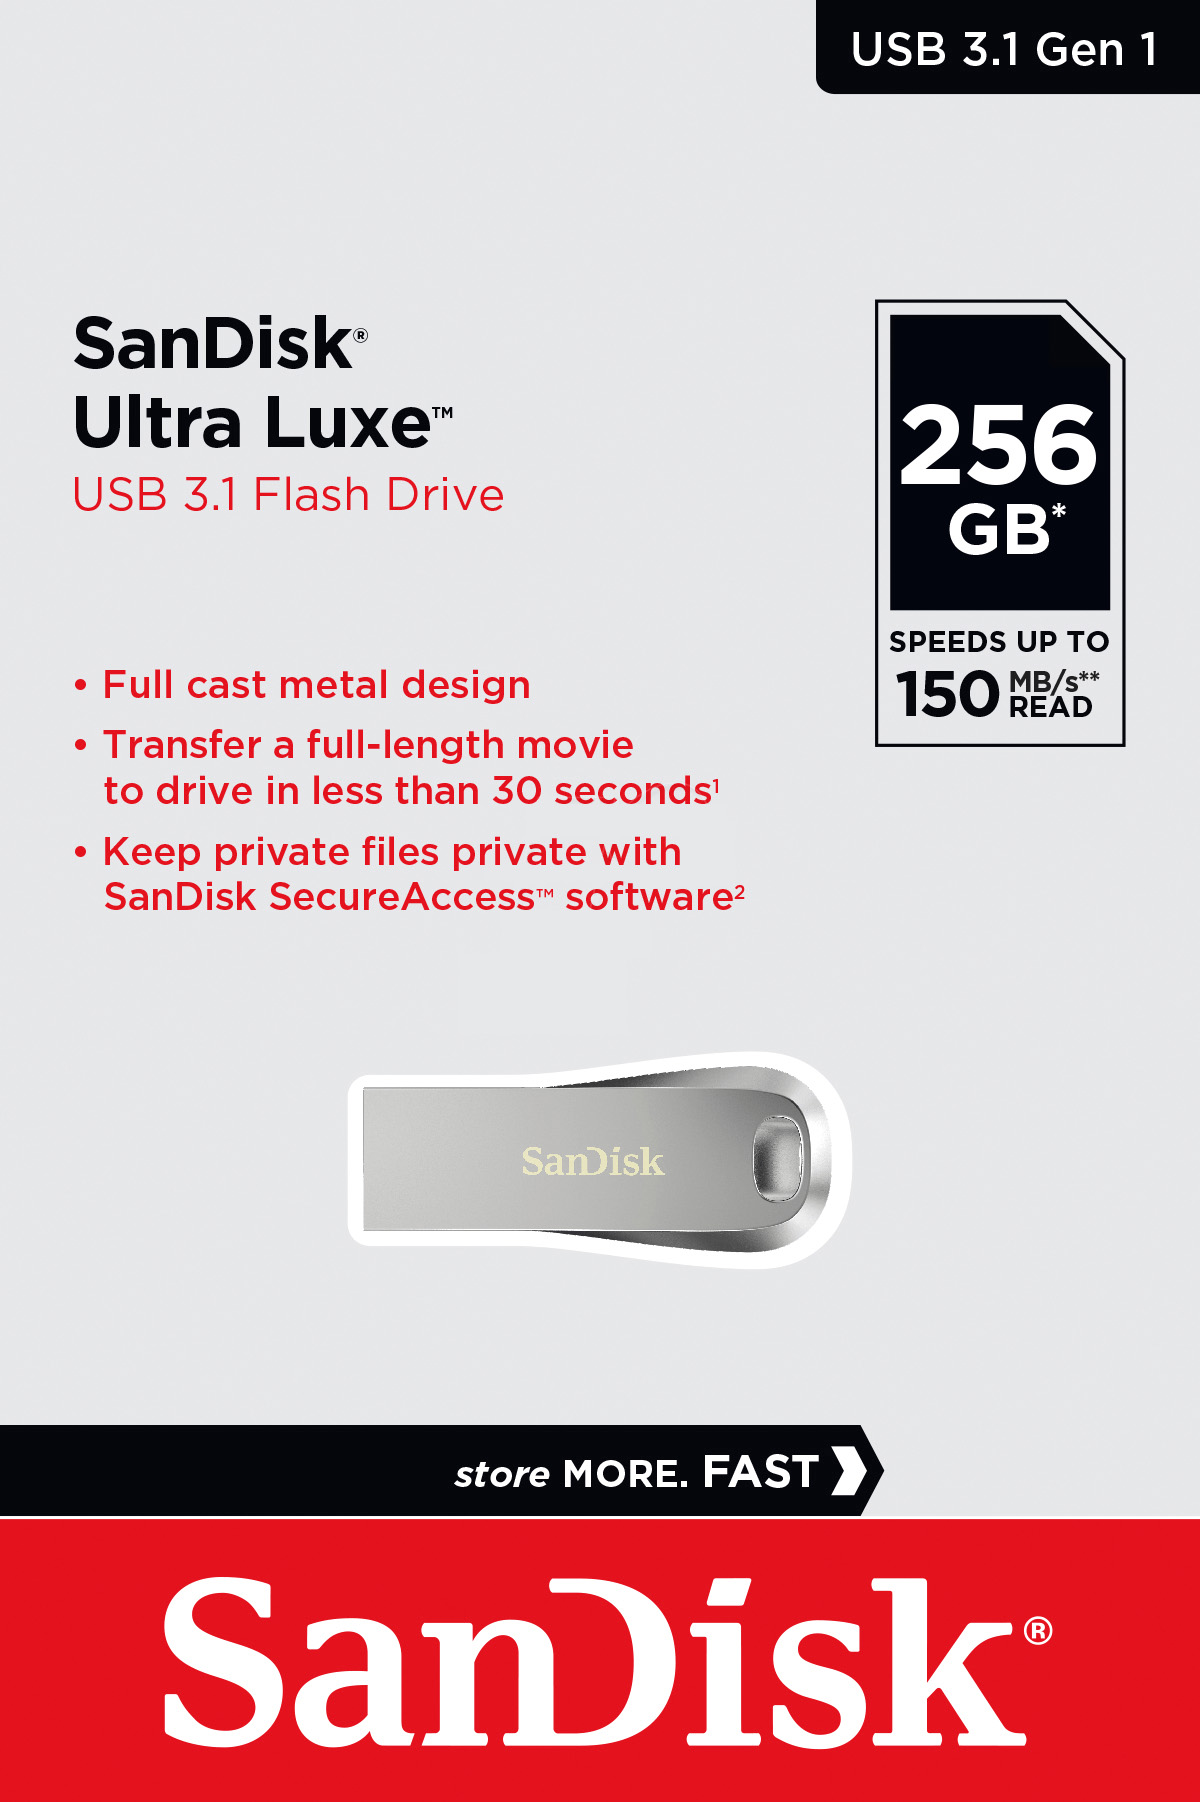 Sandisk USB 3.1 Stick 256GB, Ultra Luxe Typ-A, (R) 150MB/s, SecureAccess, Retail-Blister